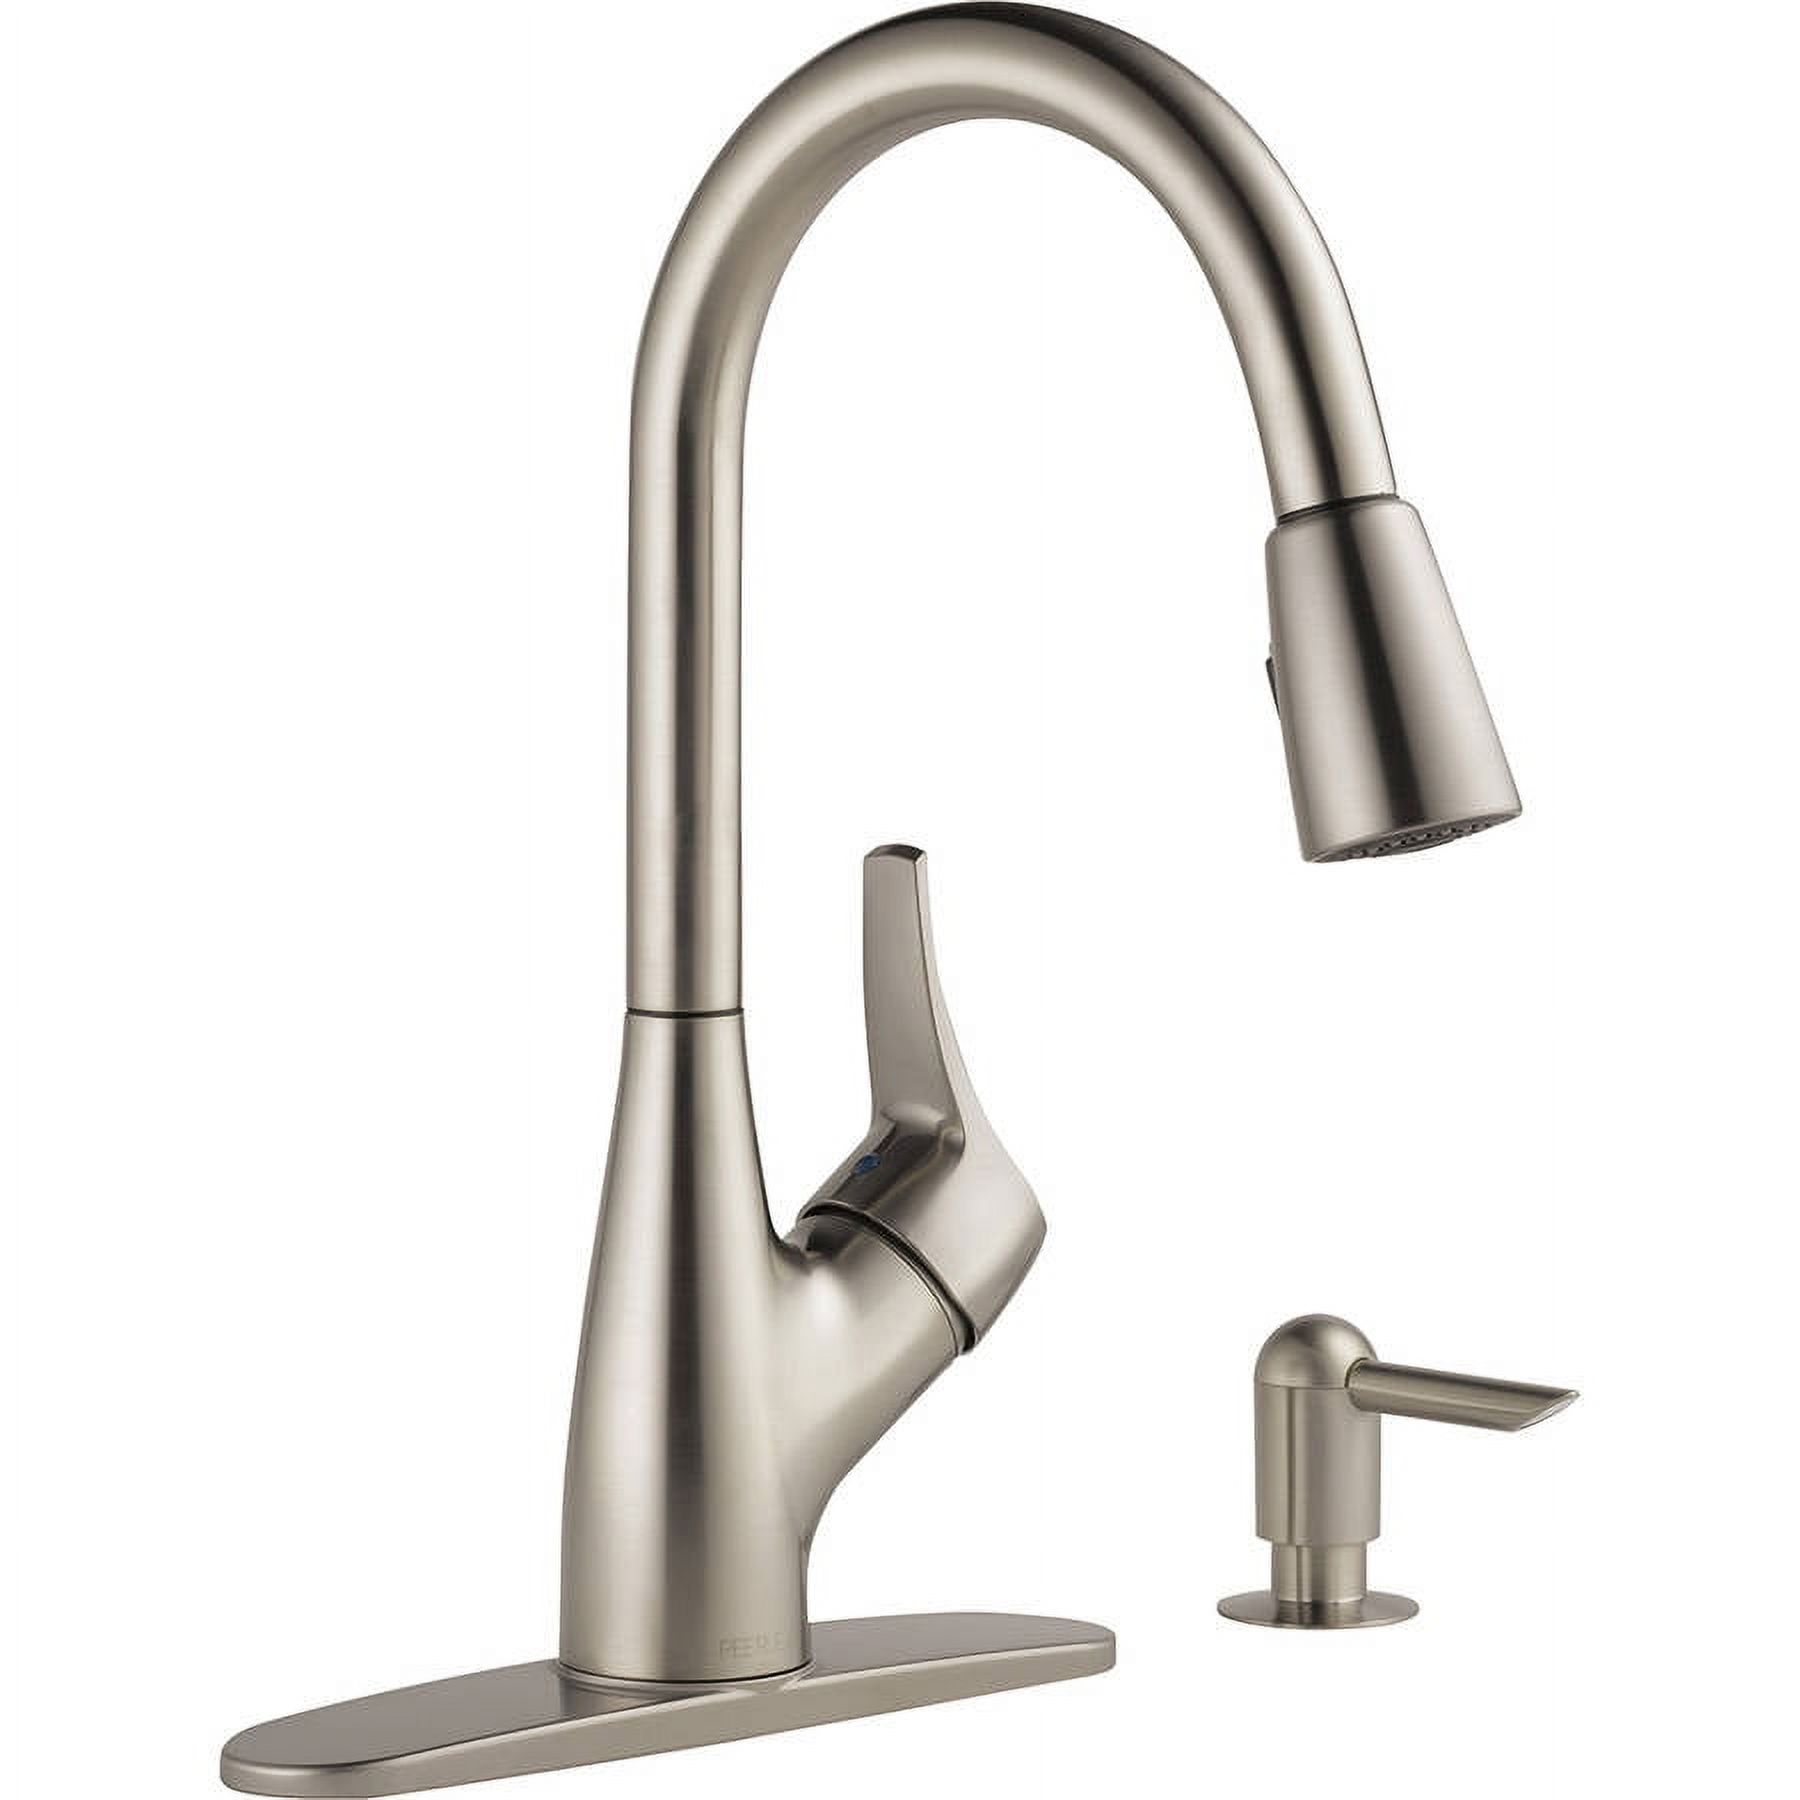 Peerless Single Handle Pull-Down Sprayer Kitchen Faucet with Soap - image 2 of 7